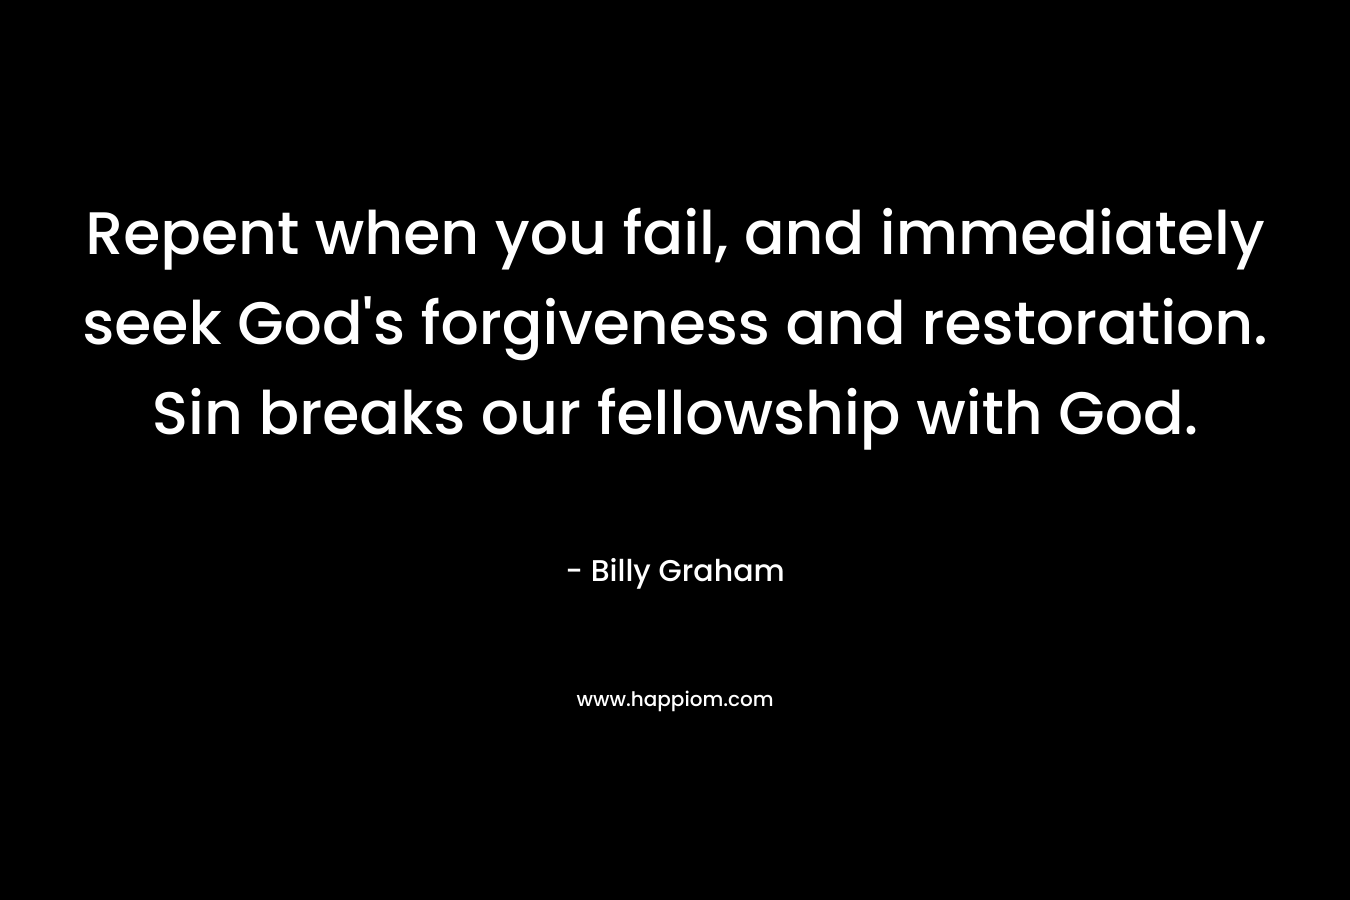 Repent when you fail, and immediately seek God's forgiveness and restoration. Sin breaks our fellowship with God.